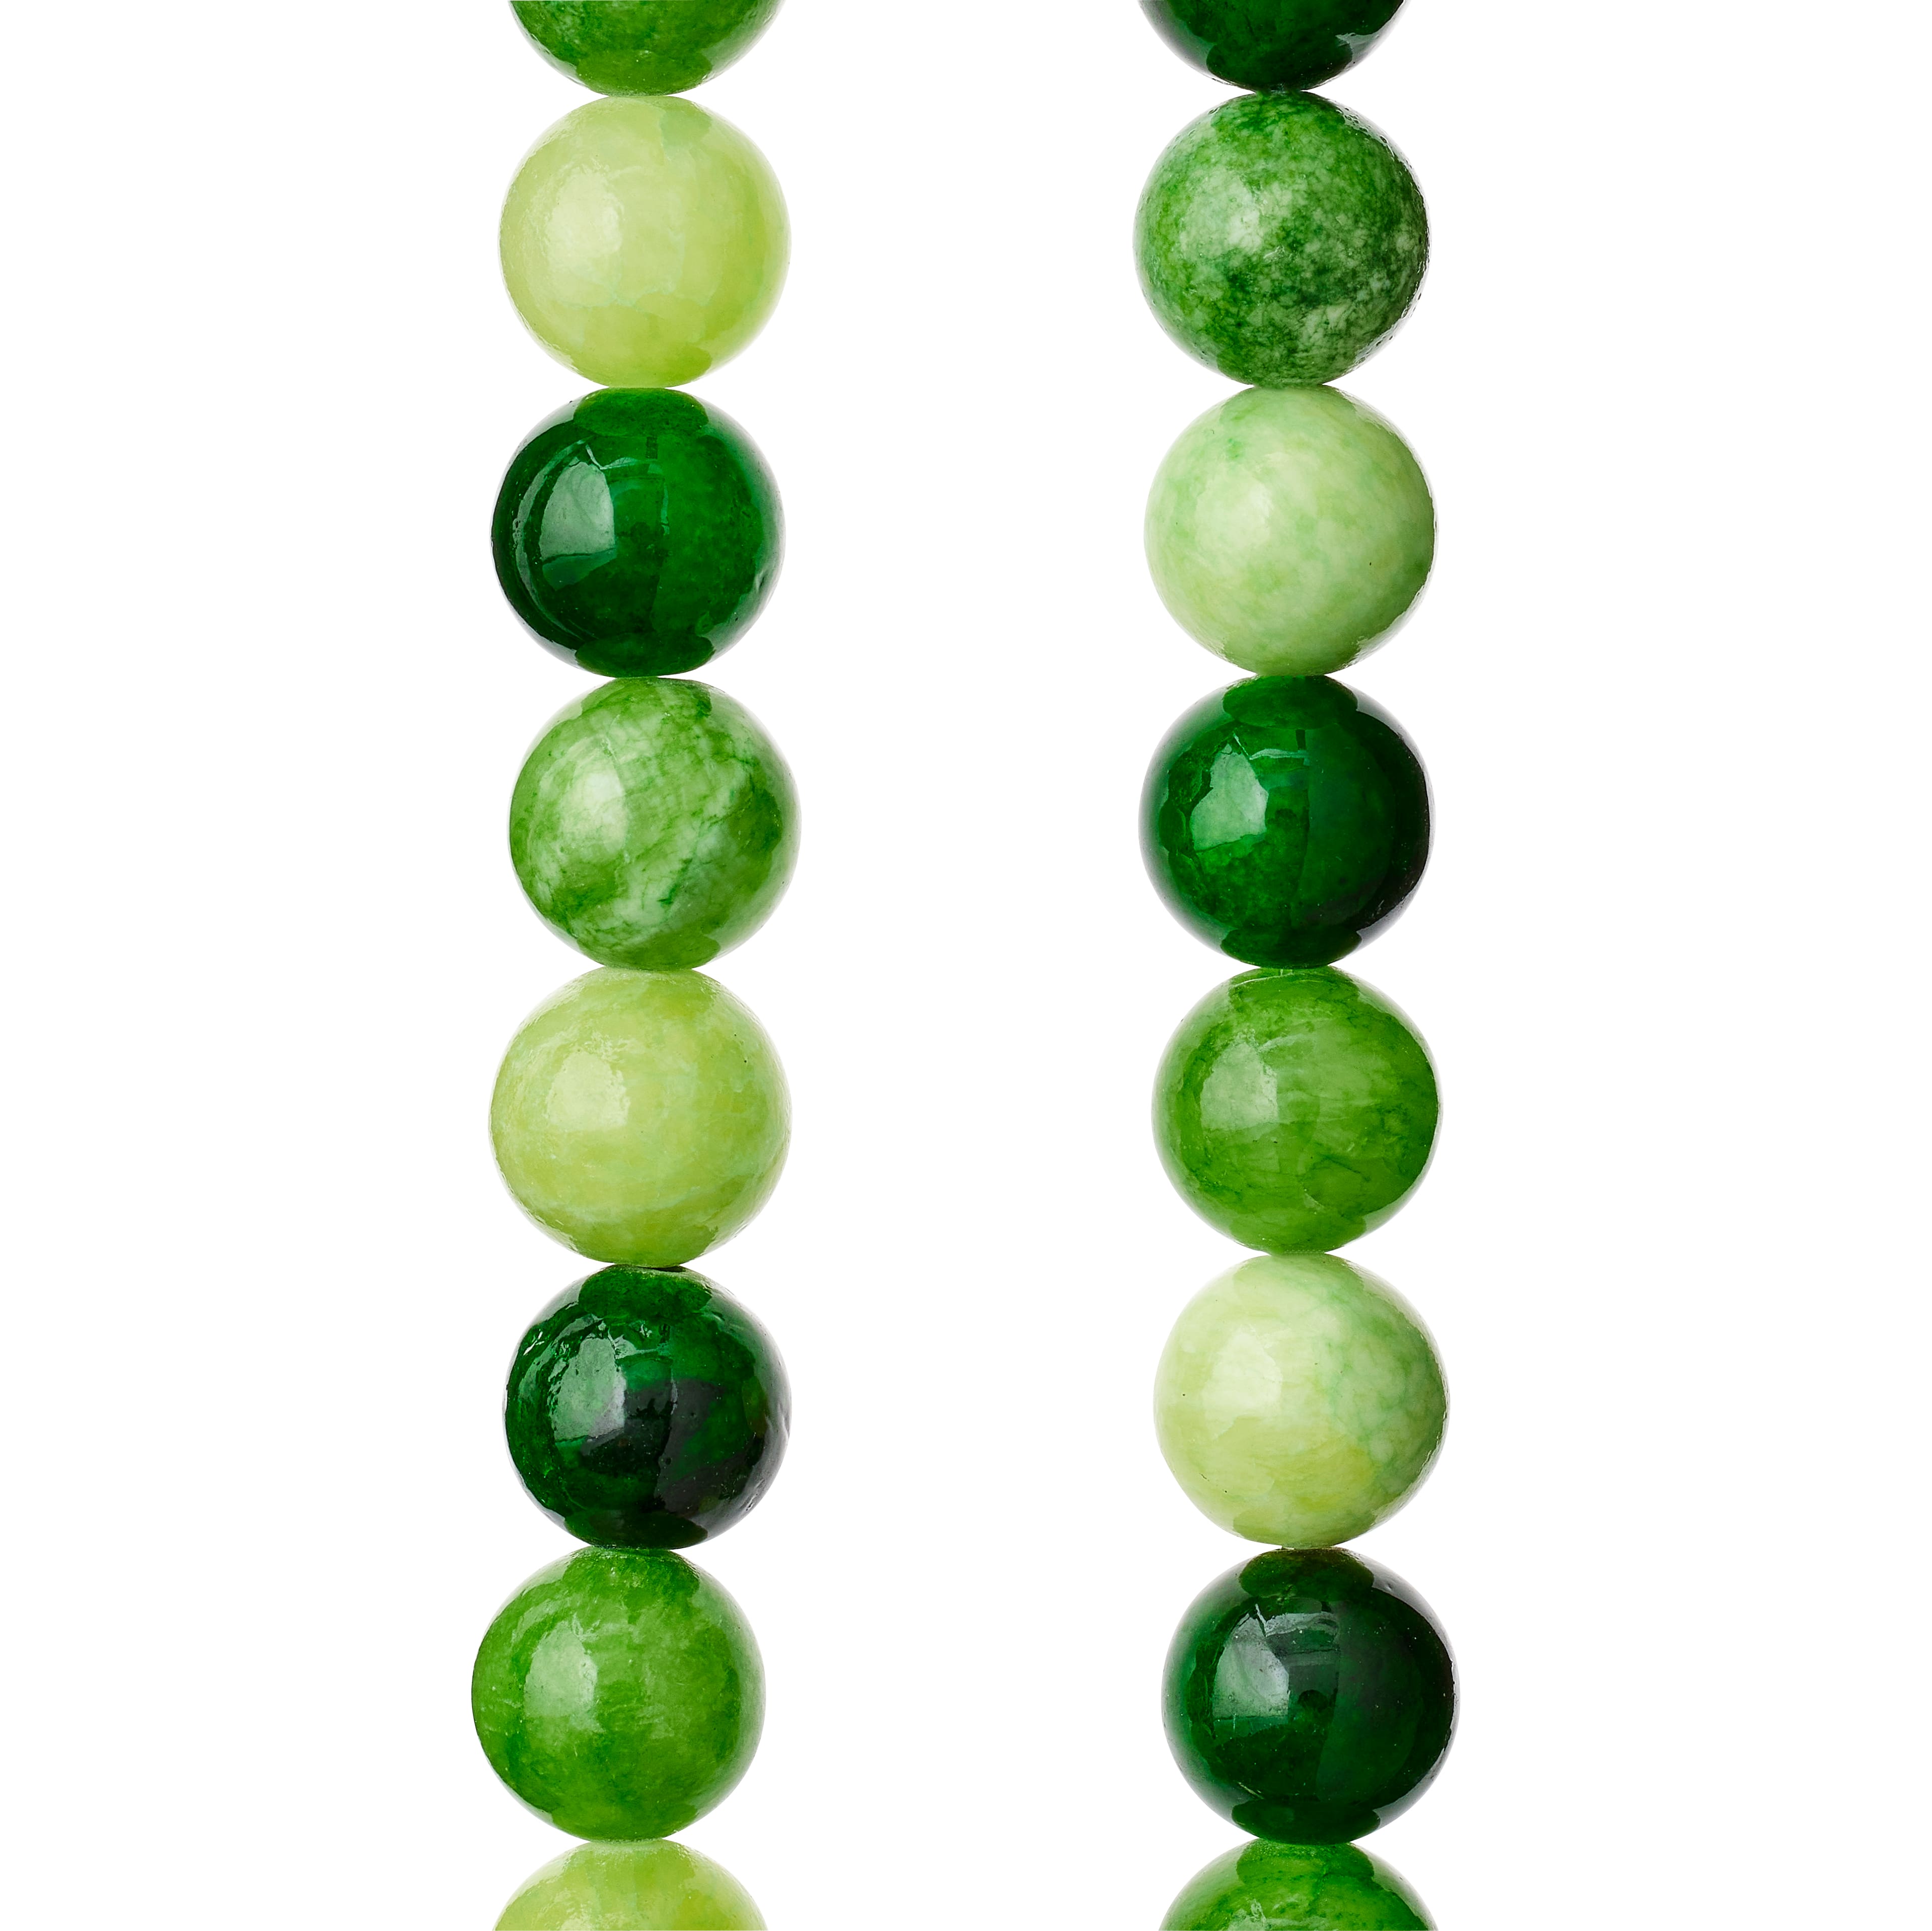 Green Iridescent Glass Faceted Beads, 3mm by Bead Landing | Michaels